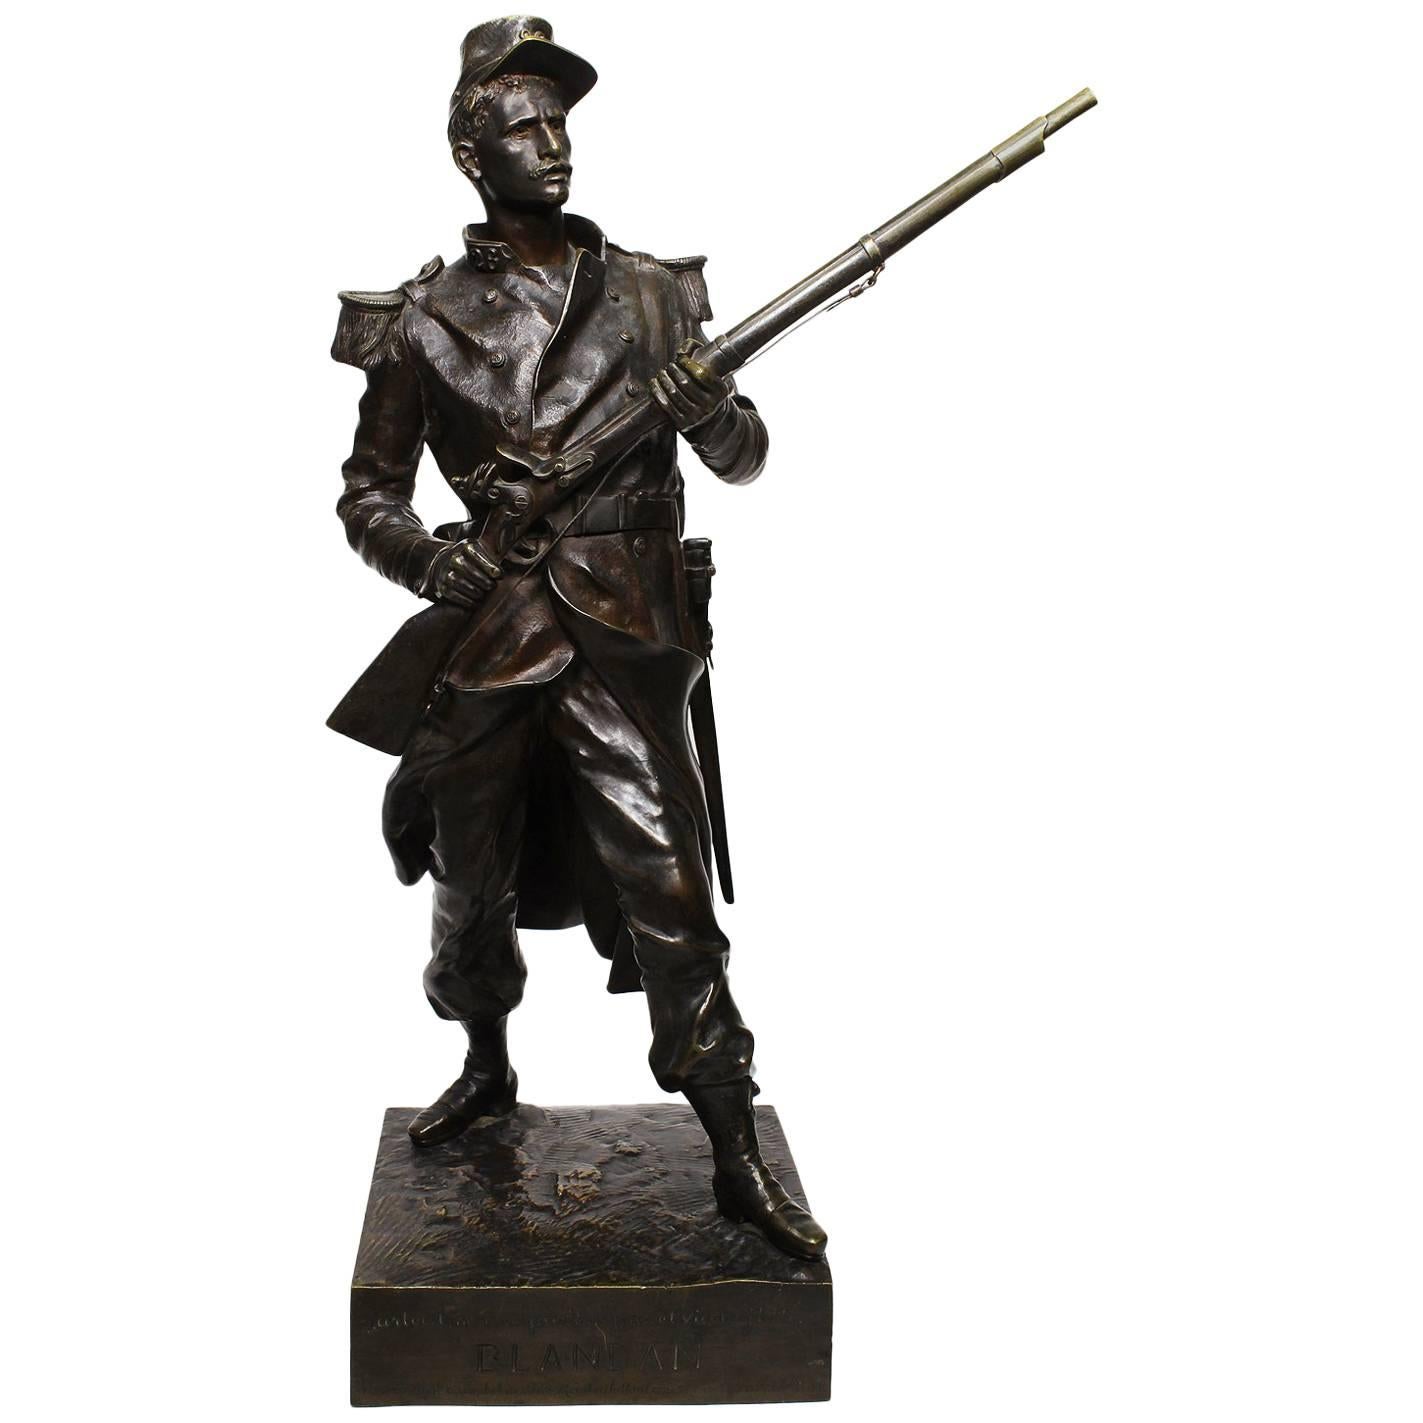 French 19th Century Bronze Military Figure of "Blandan" after Jean Gautherin